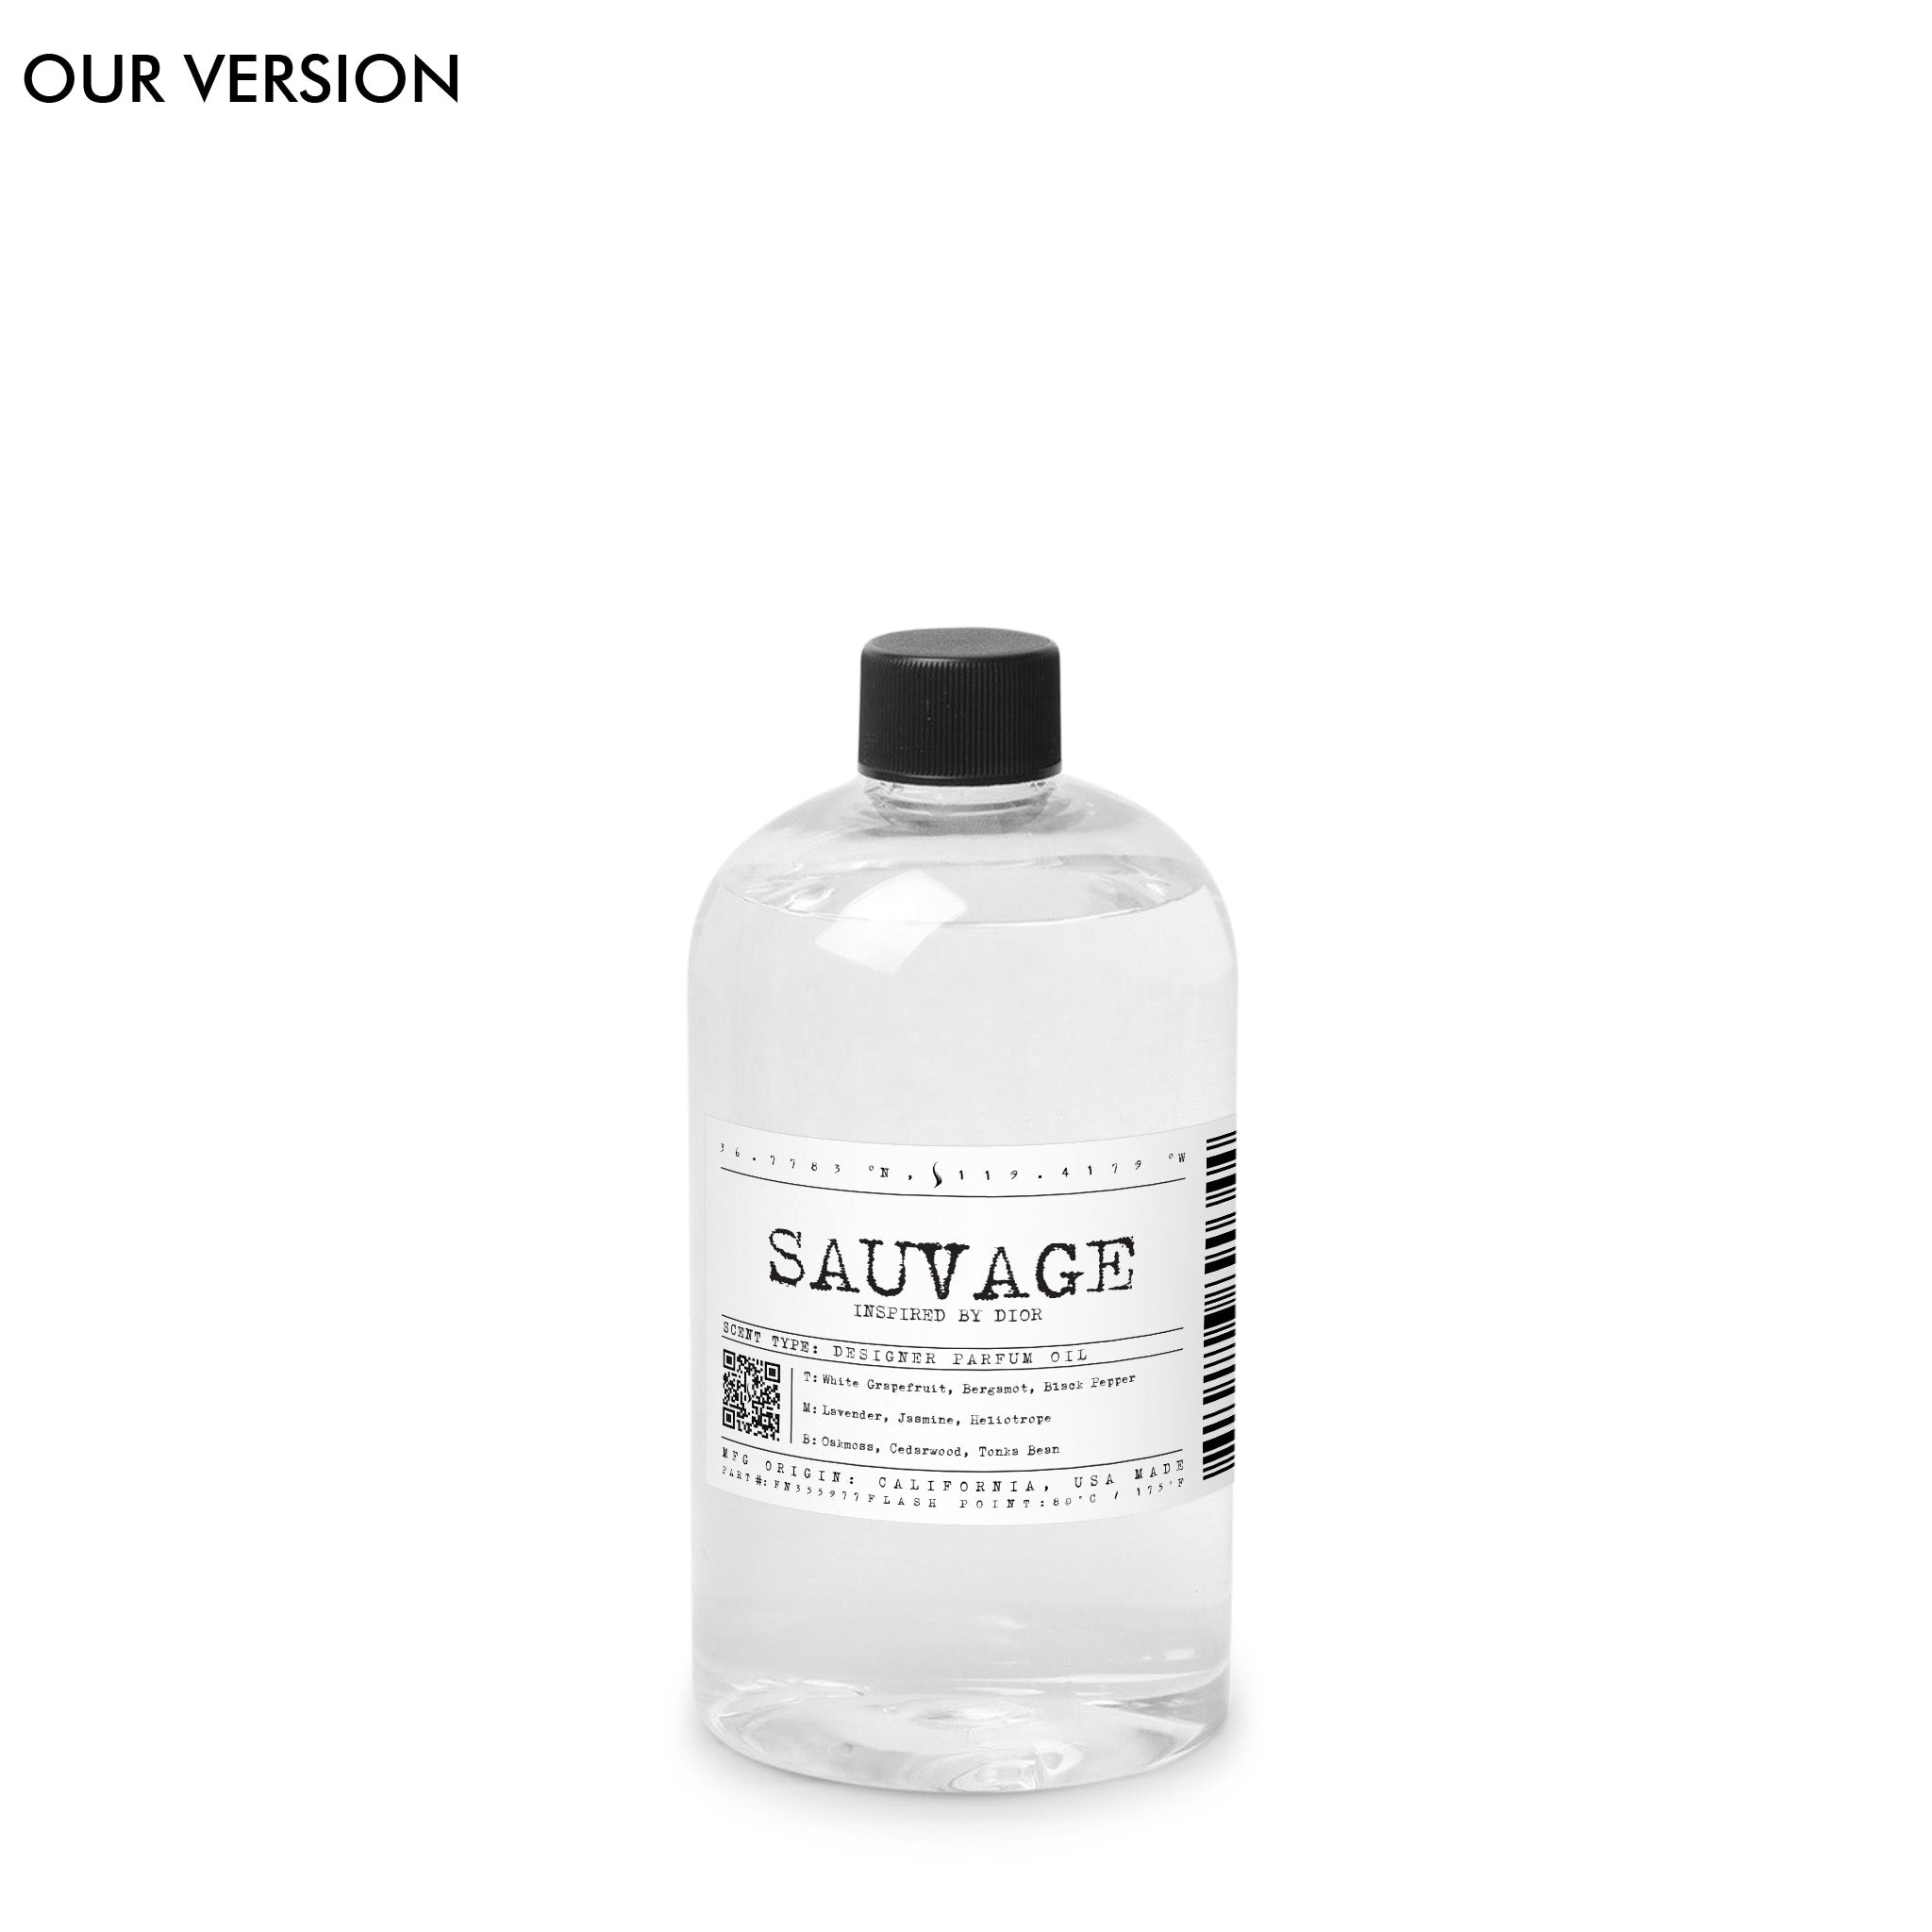 Sauvage (our version) Fragrance Oil